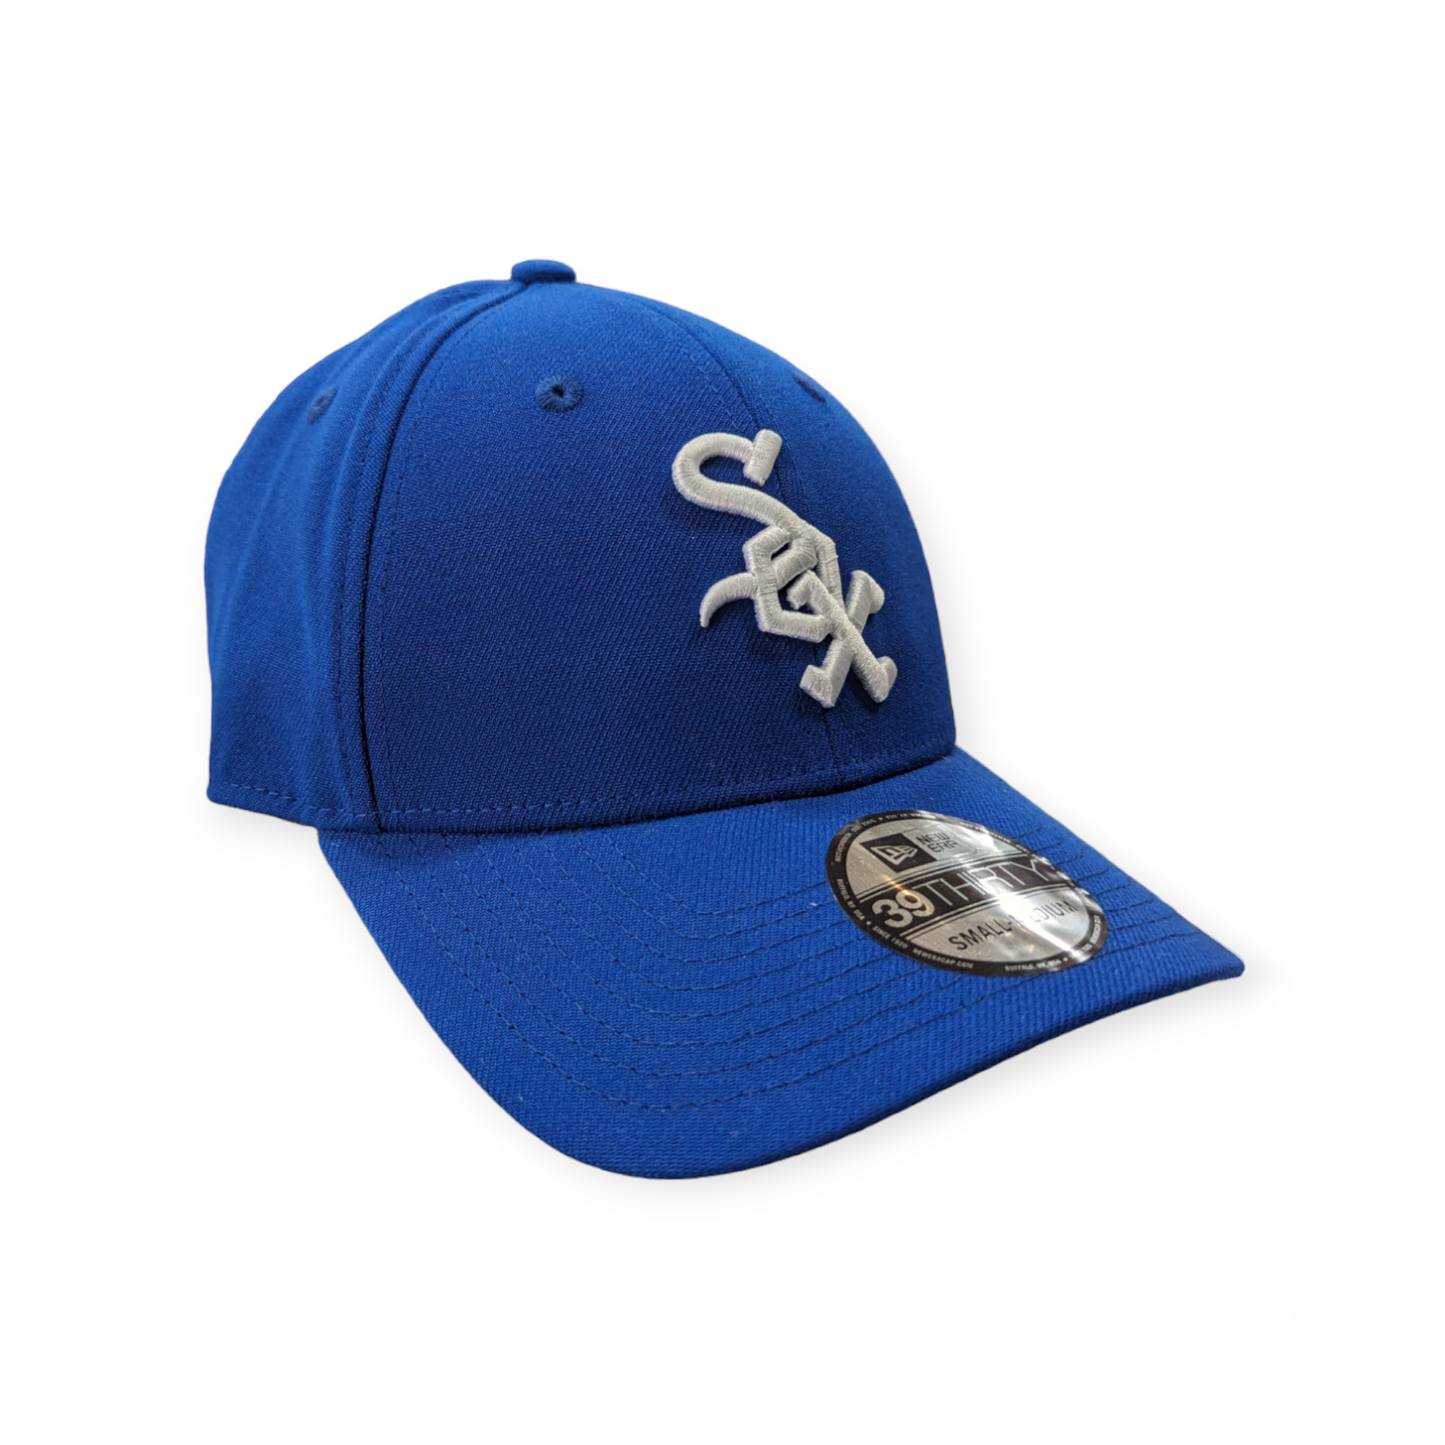 Chicago White Sox Classic 1969 Cooperstown Classics Royal Blue 39THIRTY Flex Fit New Era Hat